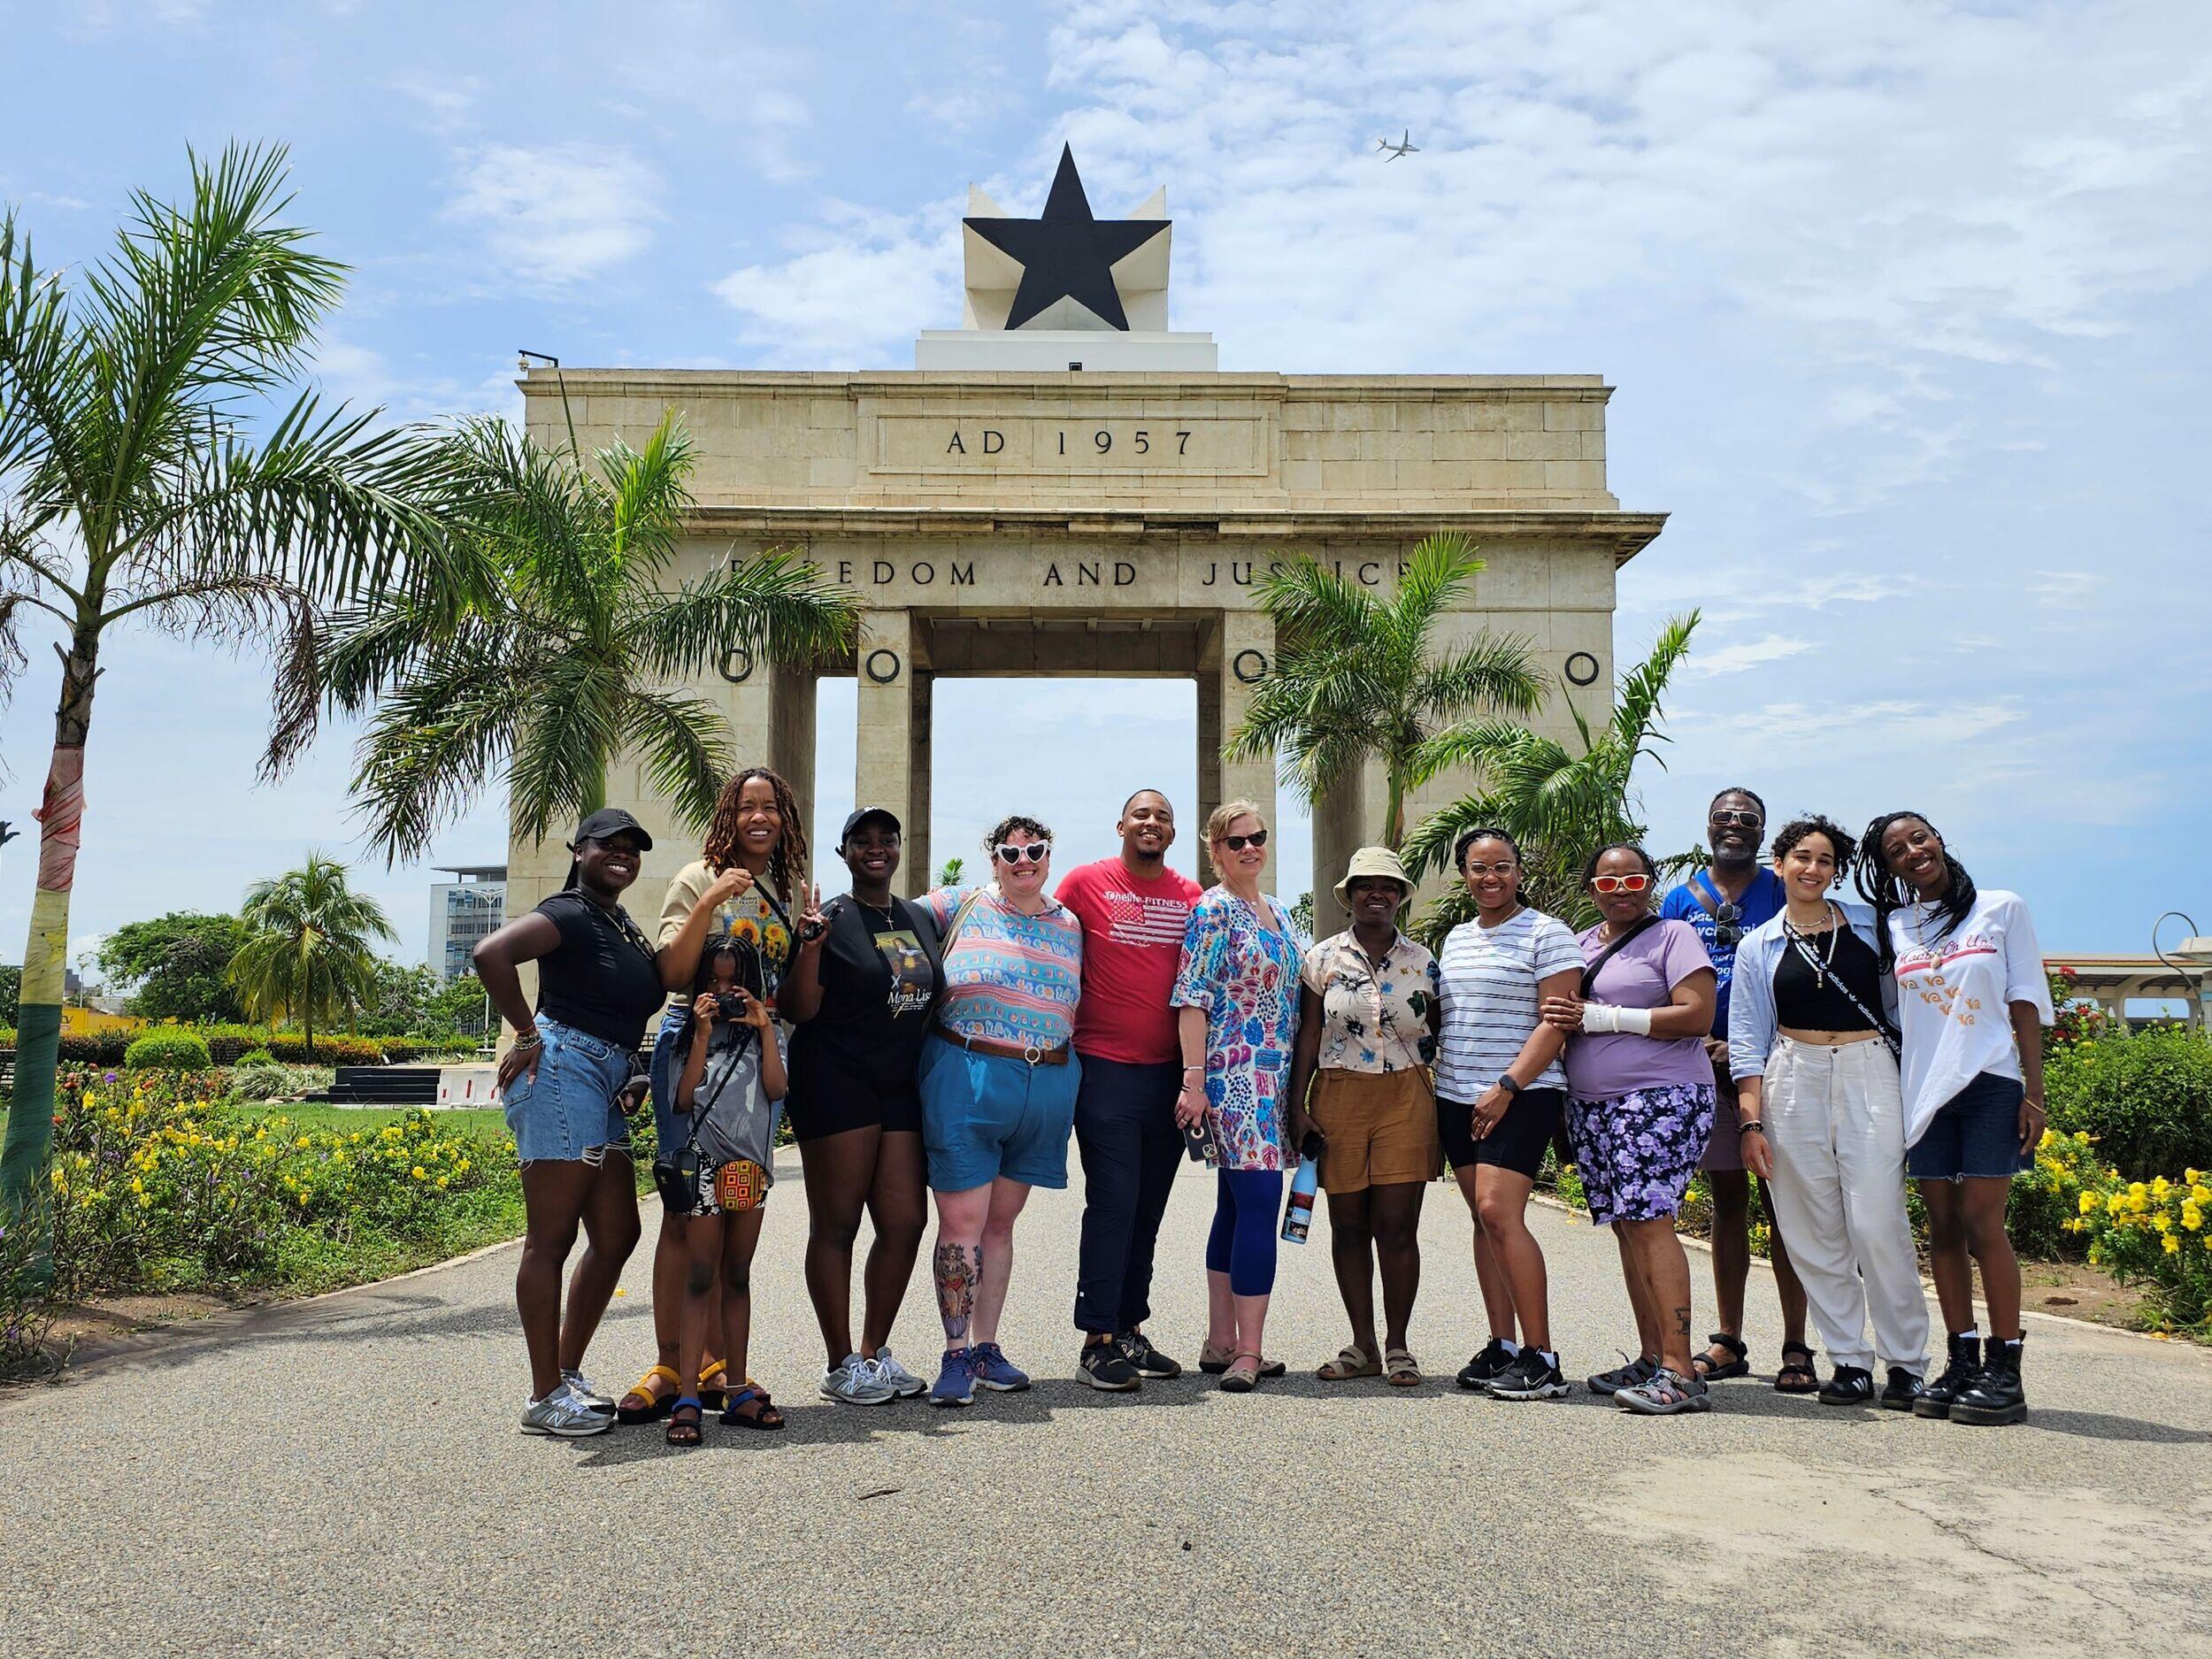 A large group of students pose in front of the Black Star Gate monument in Accra, Ghana.